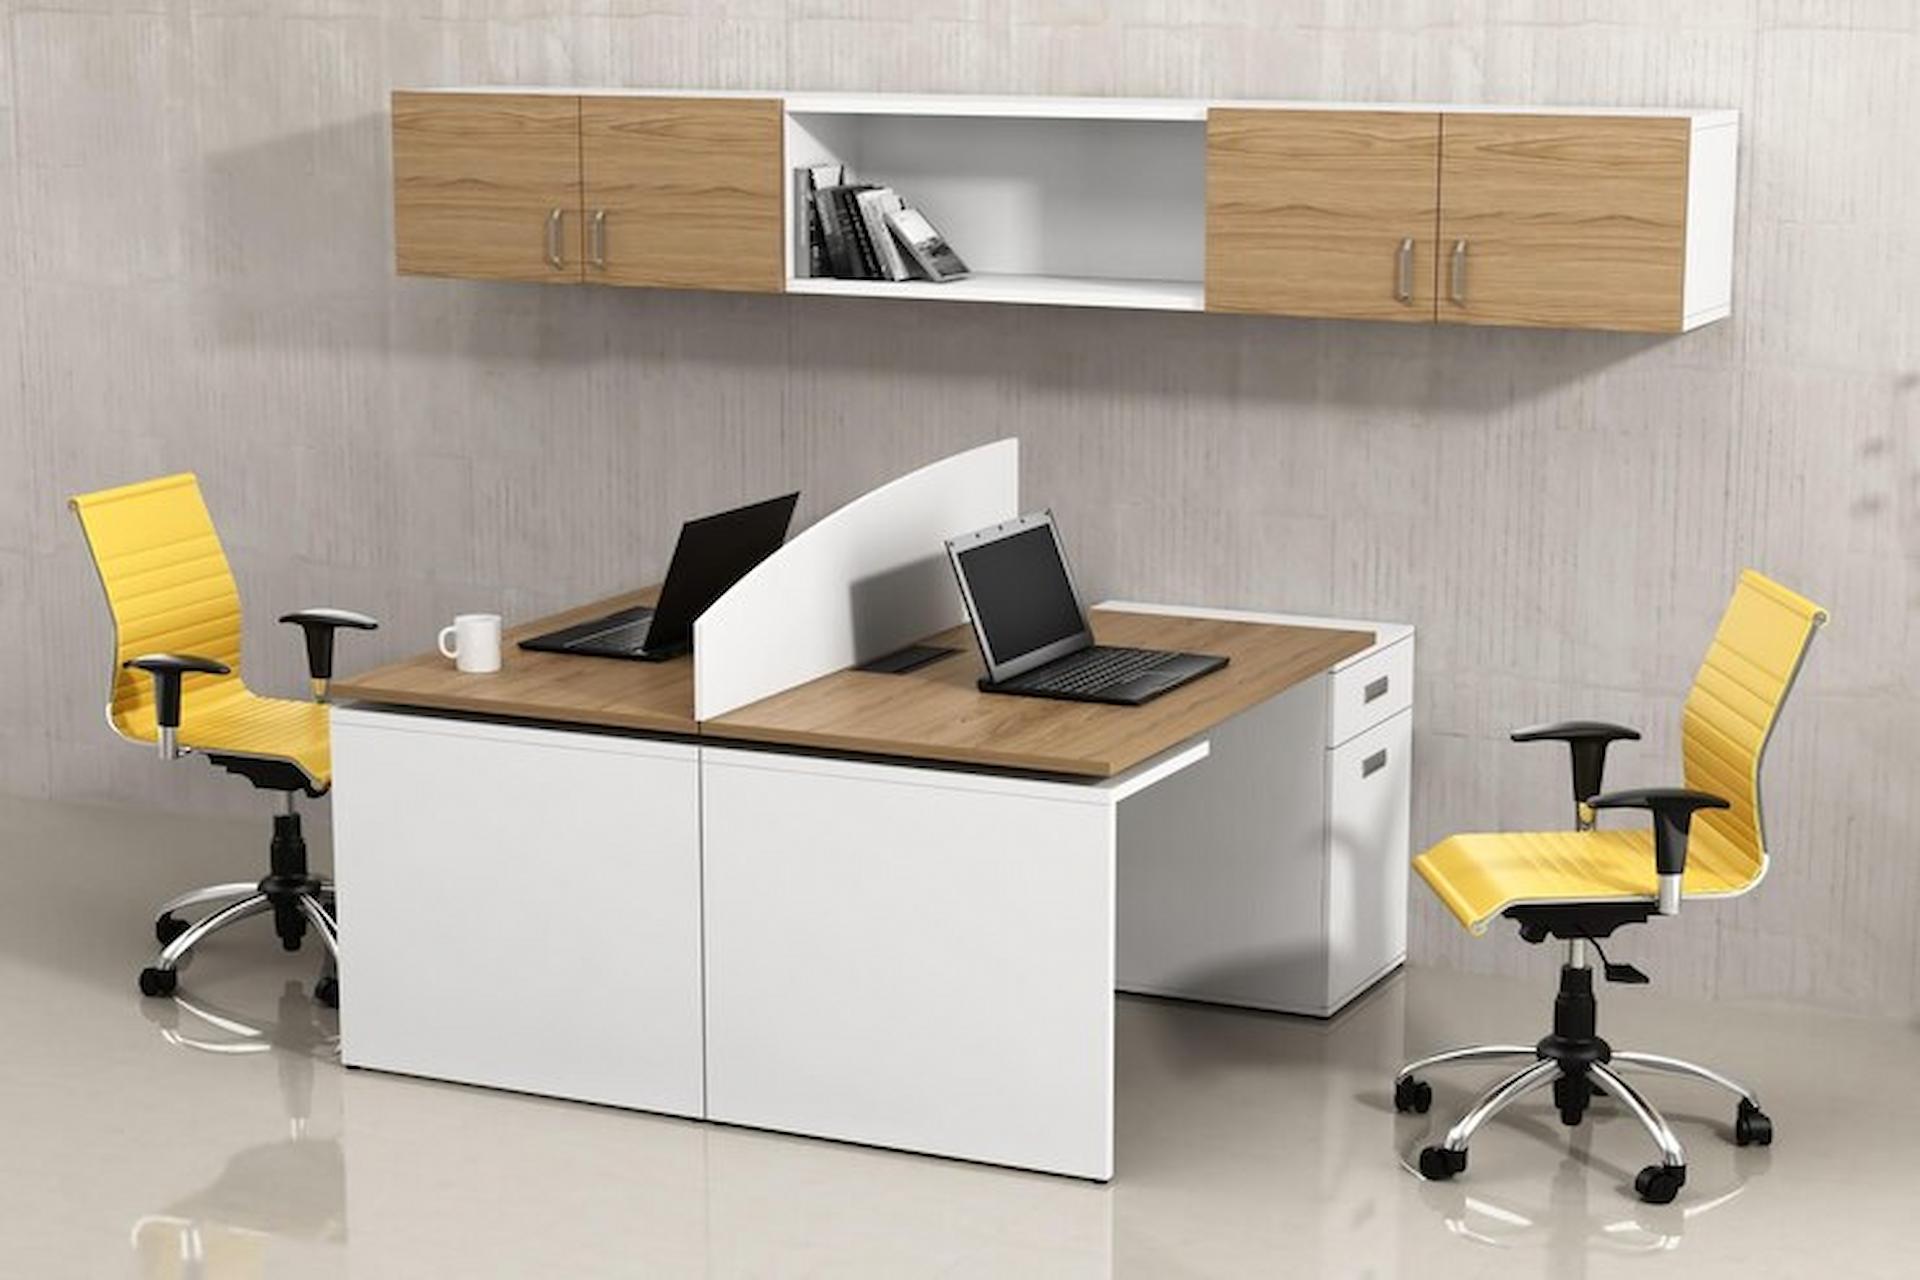 London’s Office Furniture Boom: Meeting the Demands of Modern Workplaces